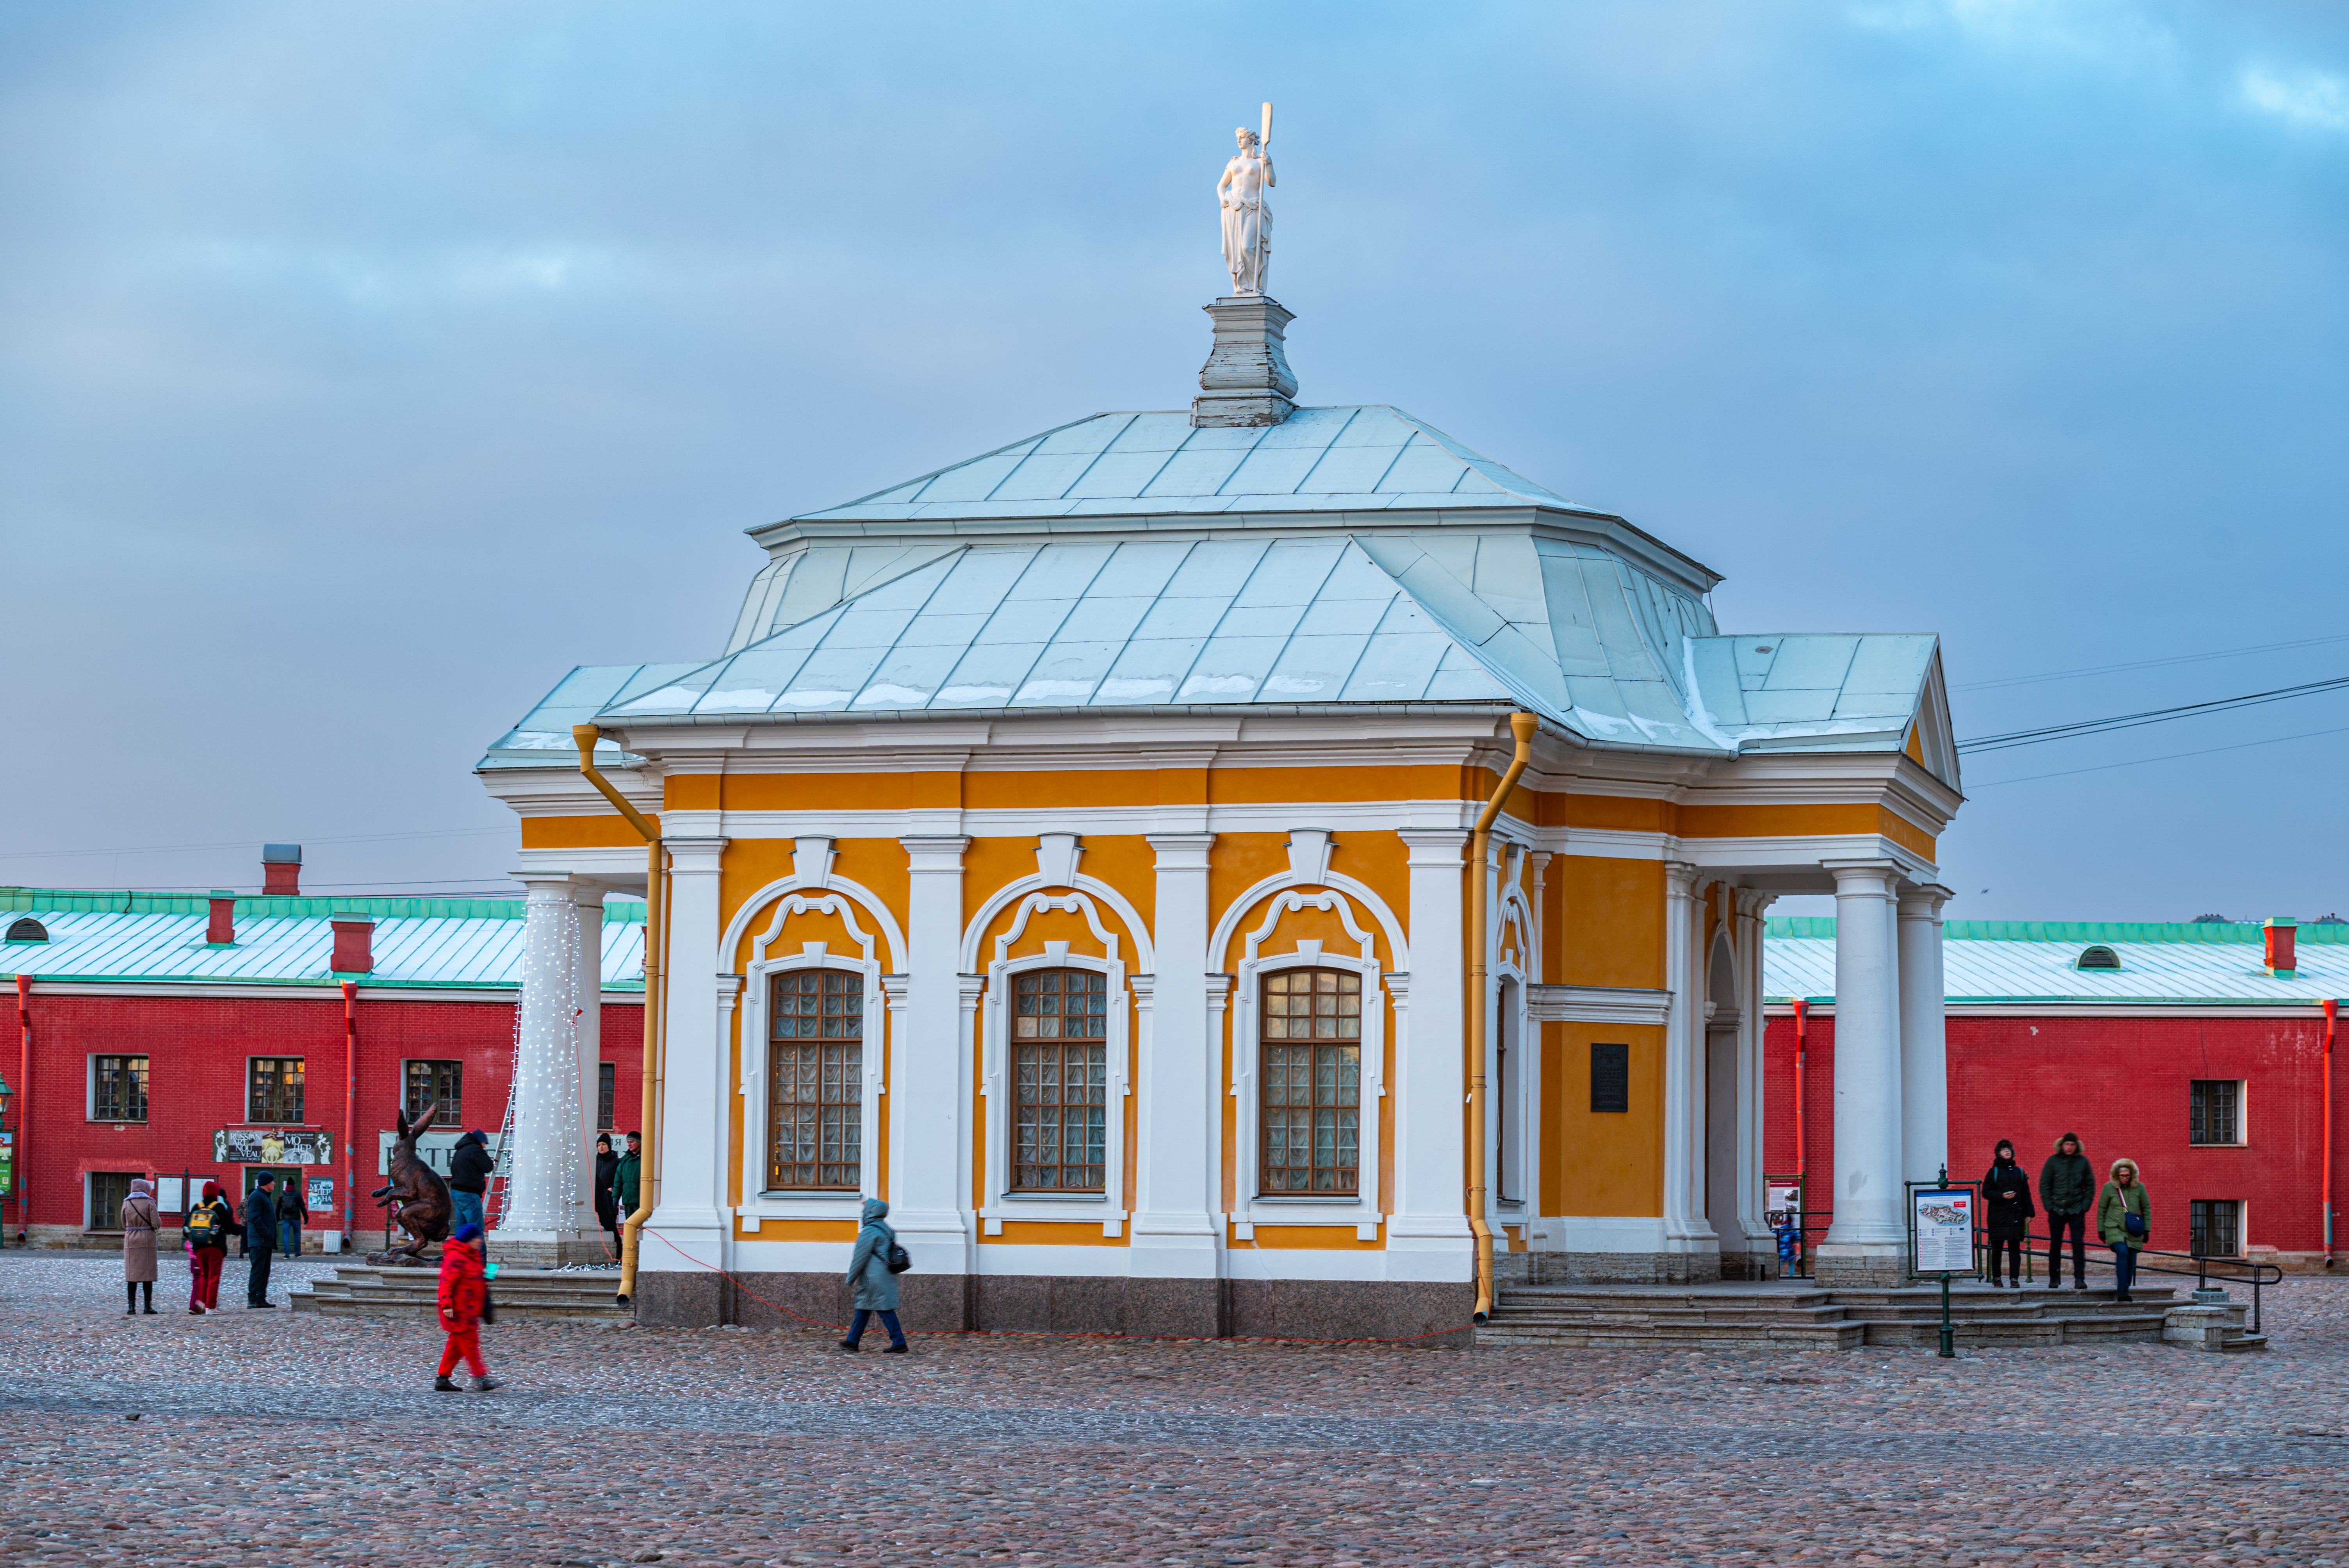 Boathouse (Peter and Paul Fortress)